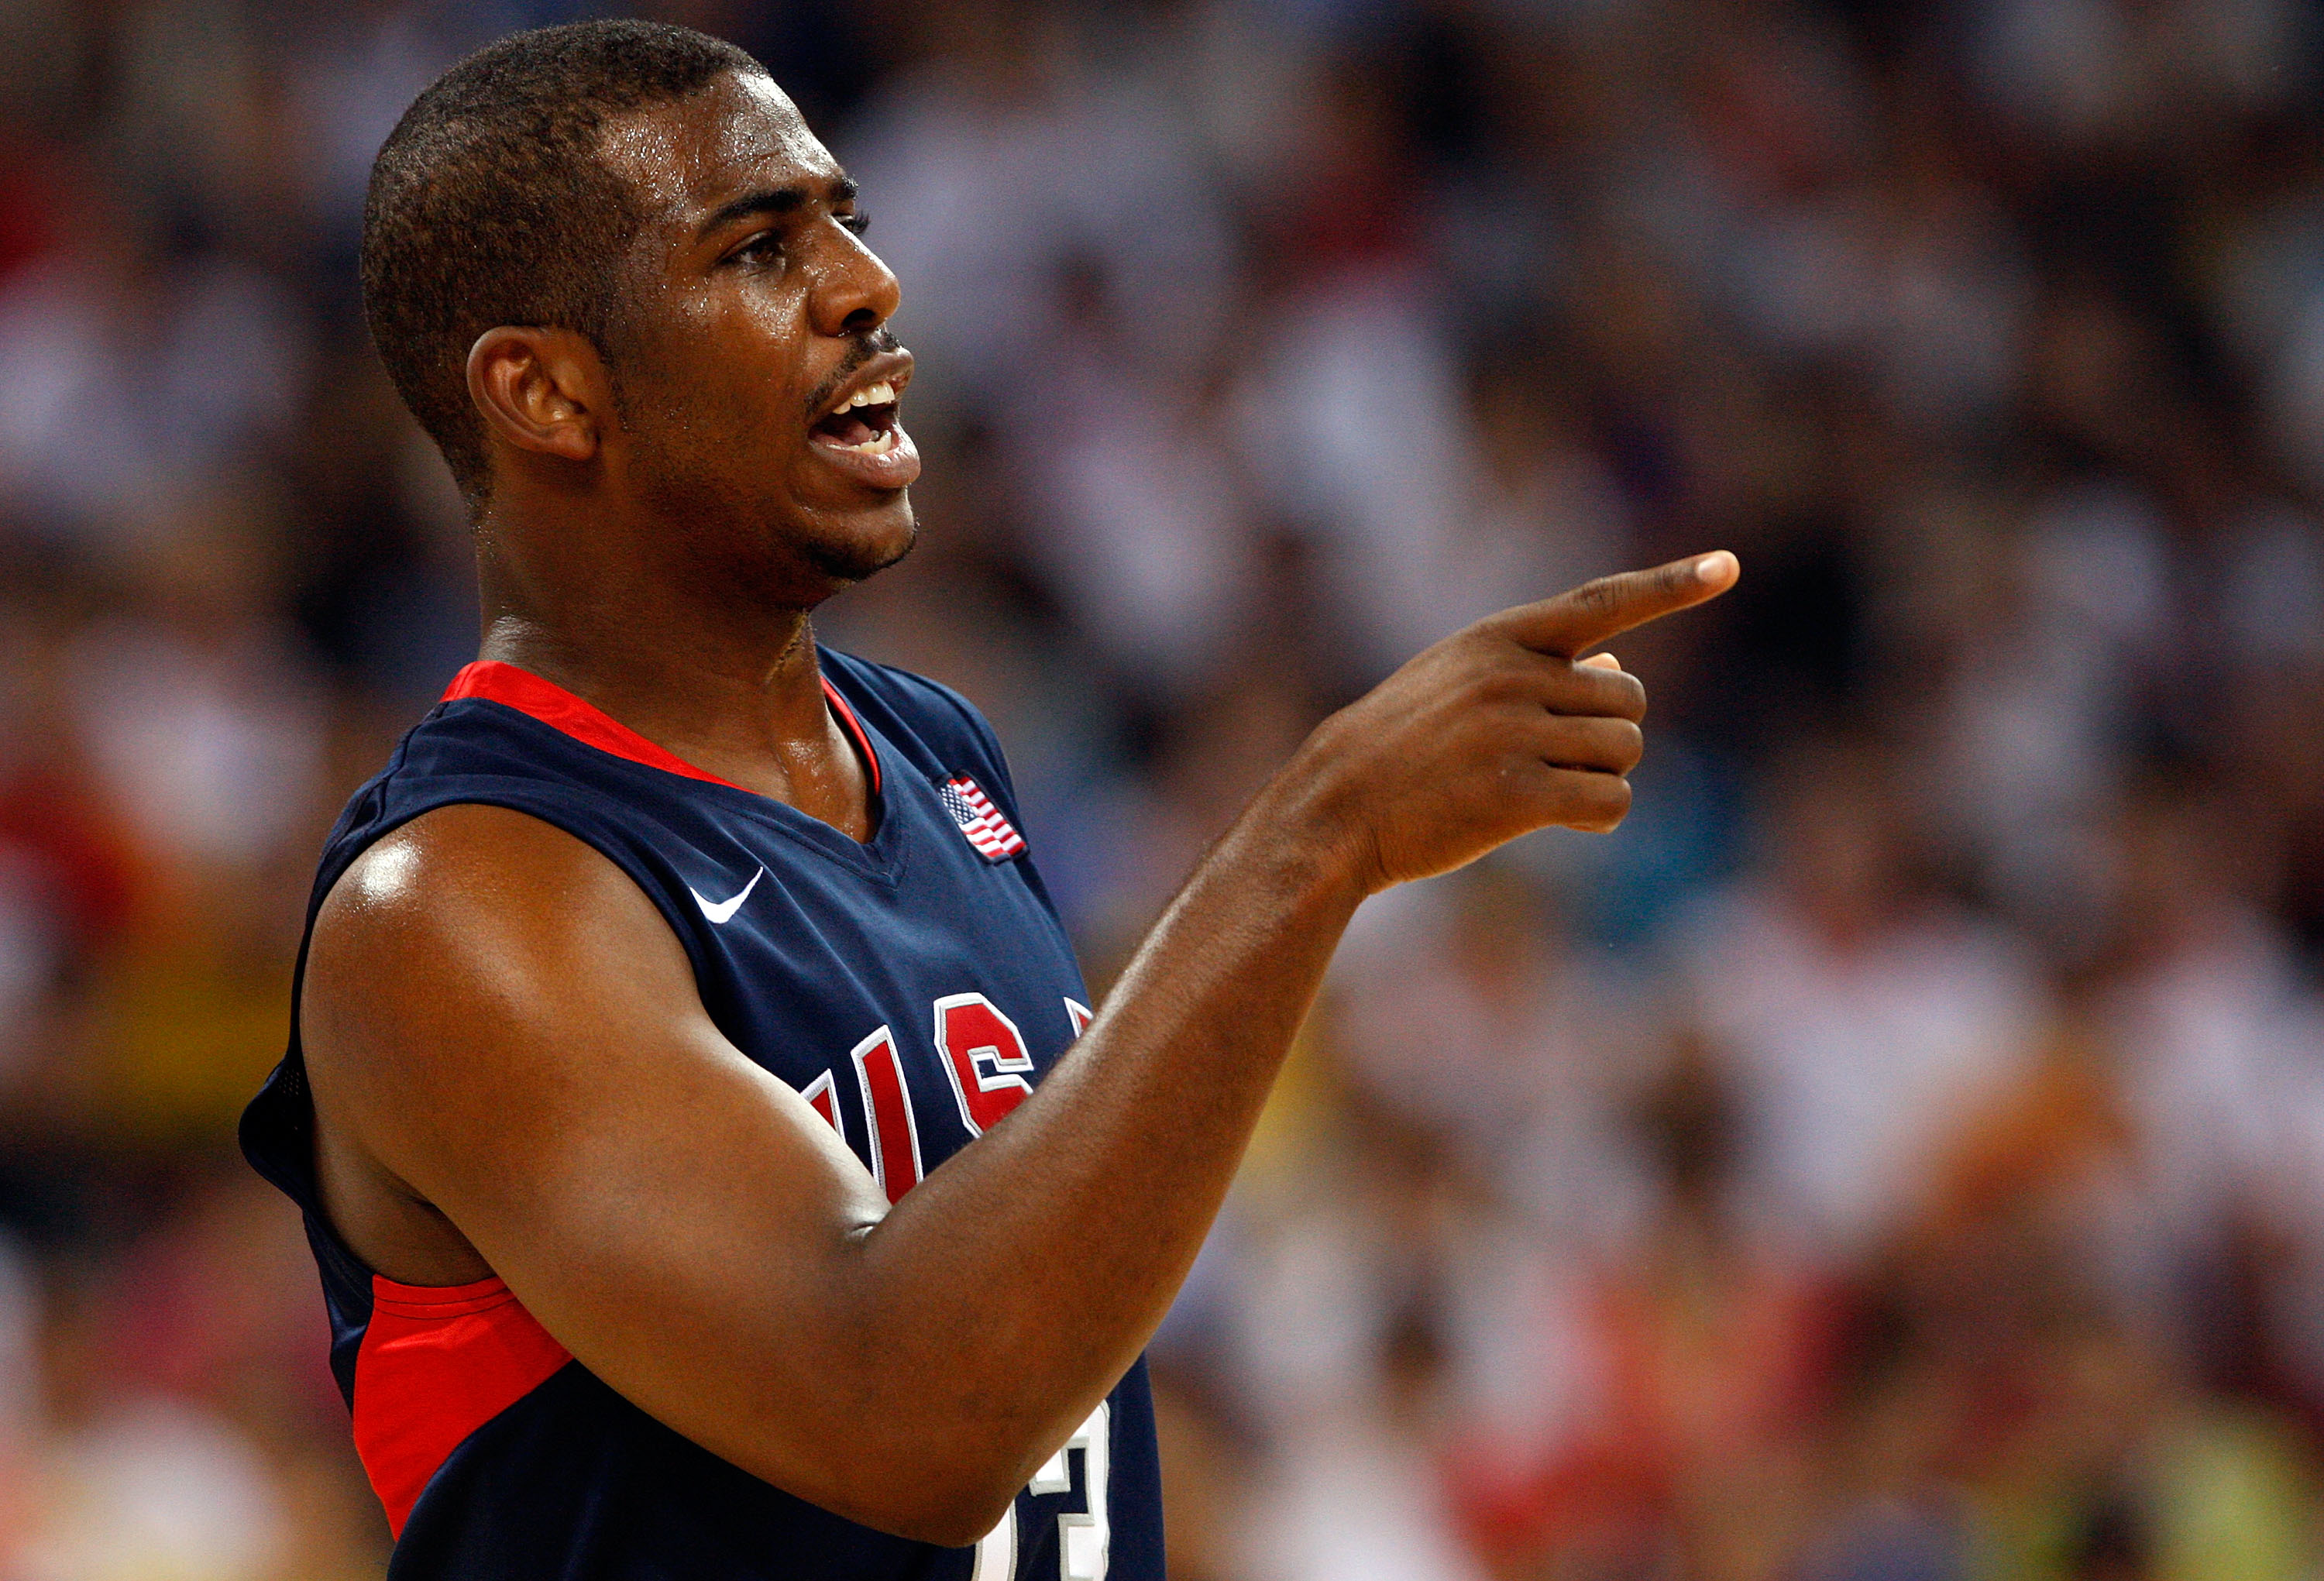 BEIJING - AUGUST 24:  Chris Paul #13 of the United States signals to teammates during the gold medal game against Spain during Day 16 of the Beijing 2008 Olympic Games at the Beijing Olympic Basketball Gymnasium on August 24, 2008 in Beijing, China.  (Pho